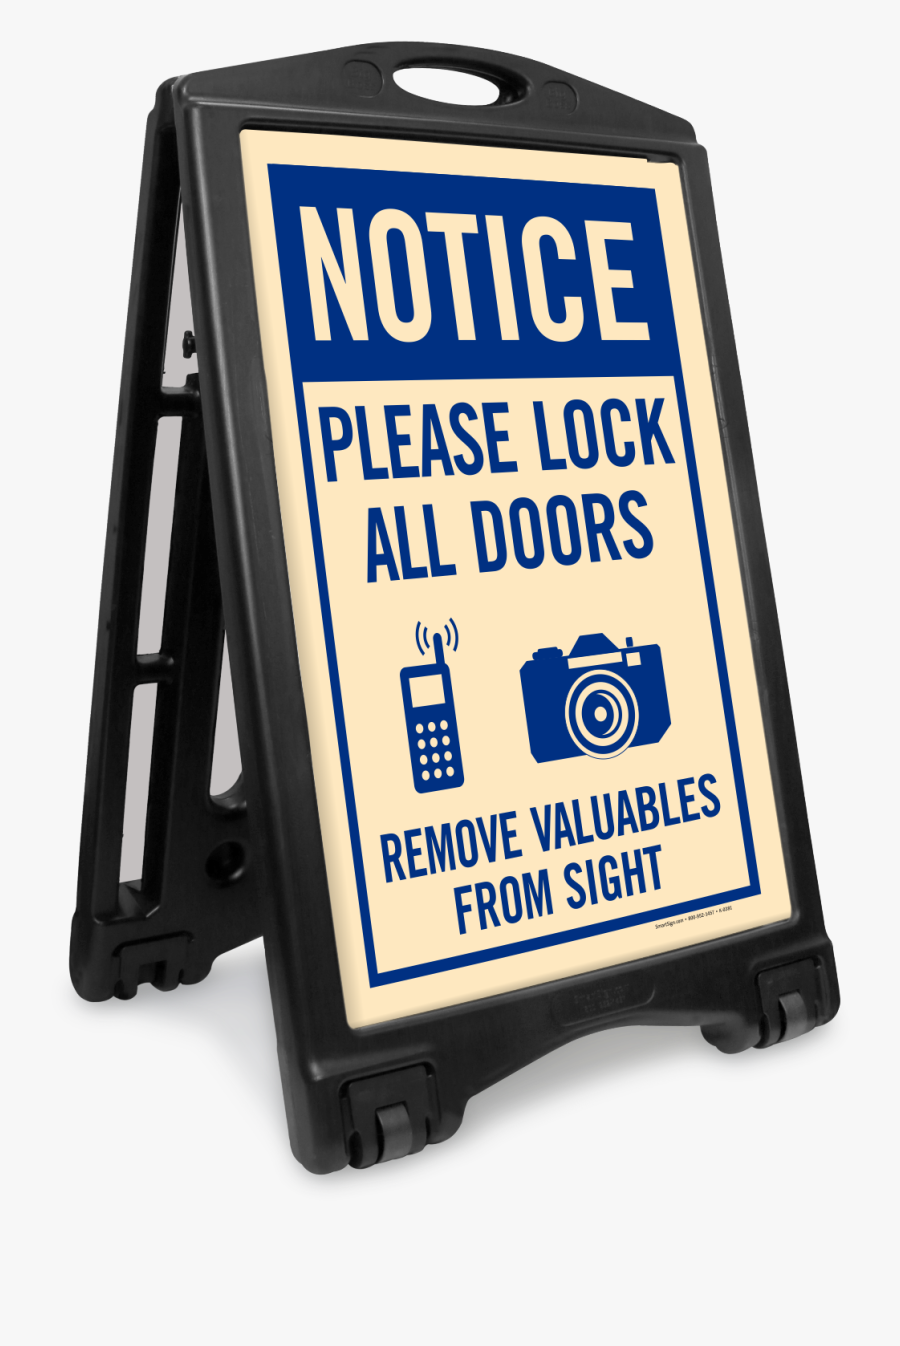 Zoom Price Buy Sc 1 St Myparkingsign & Lock Your Car - Sign, Transparent Clipart